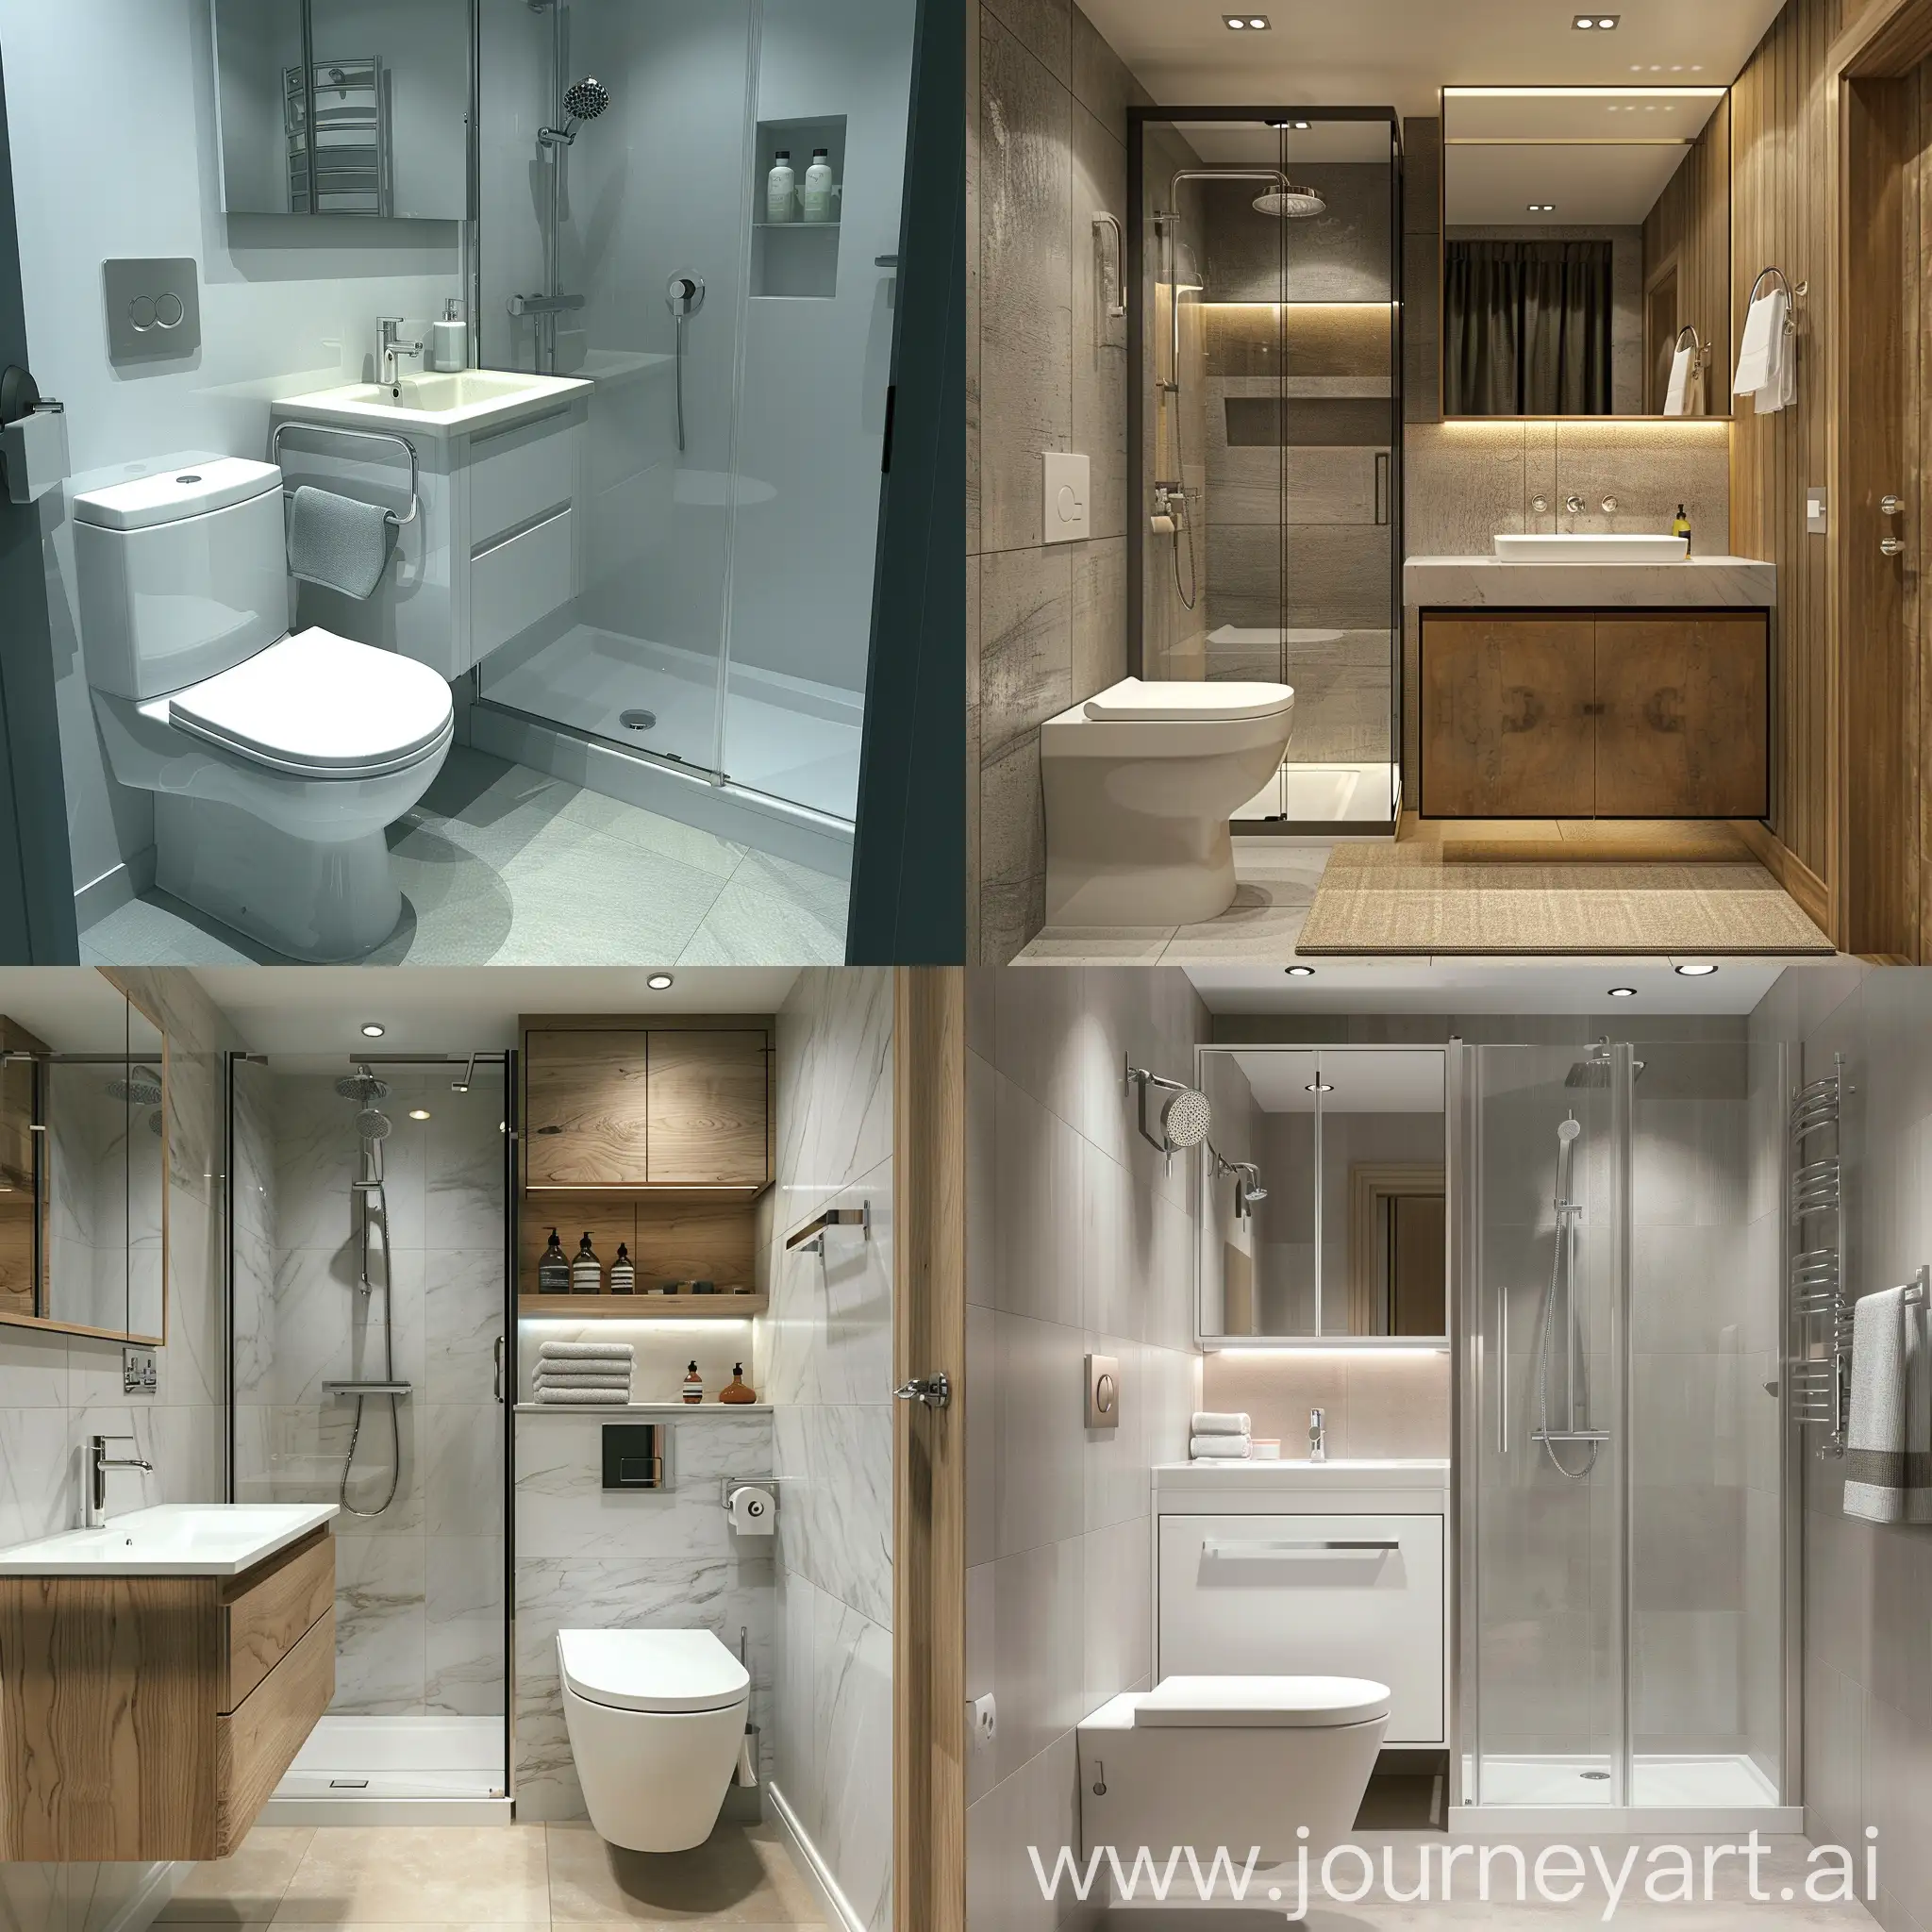 Modern-6x4-Bathroom-Layout-with-Toilet-Washbasin-and-Shower